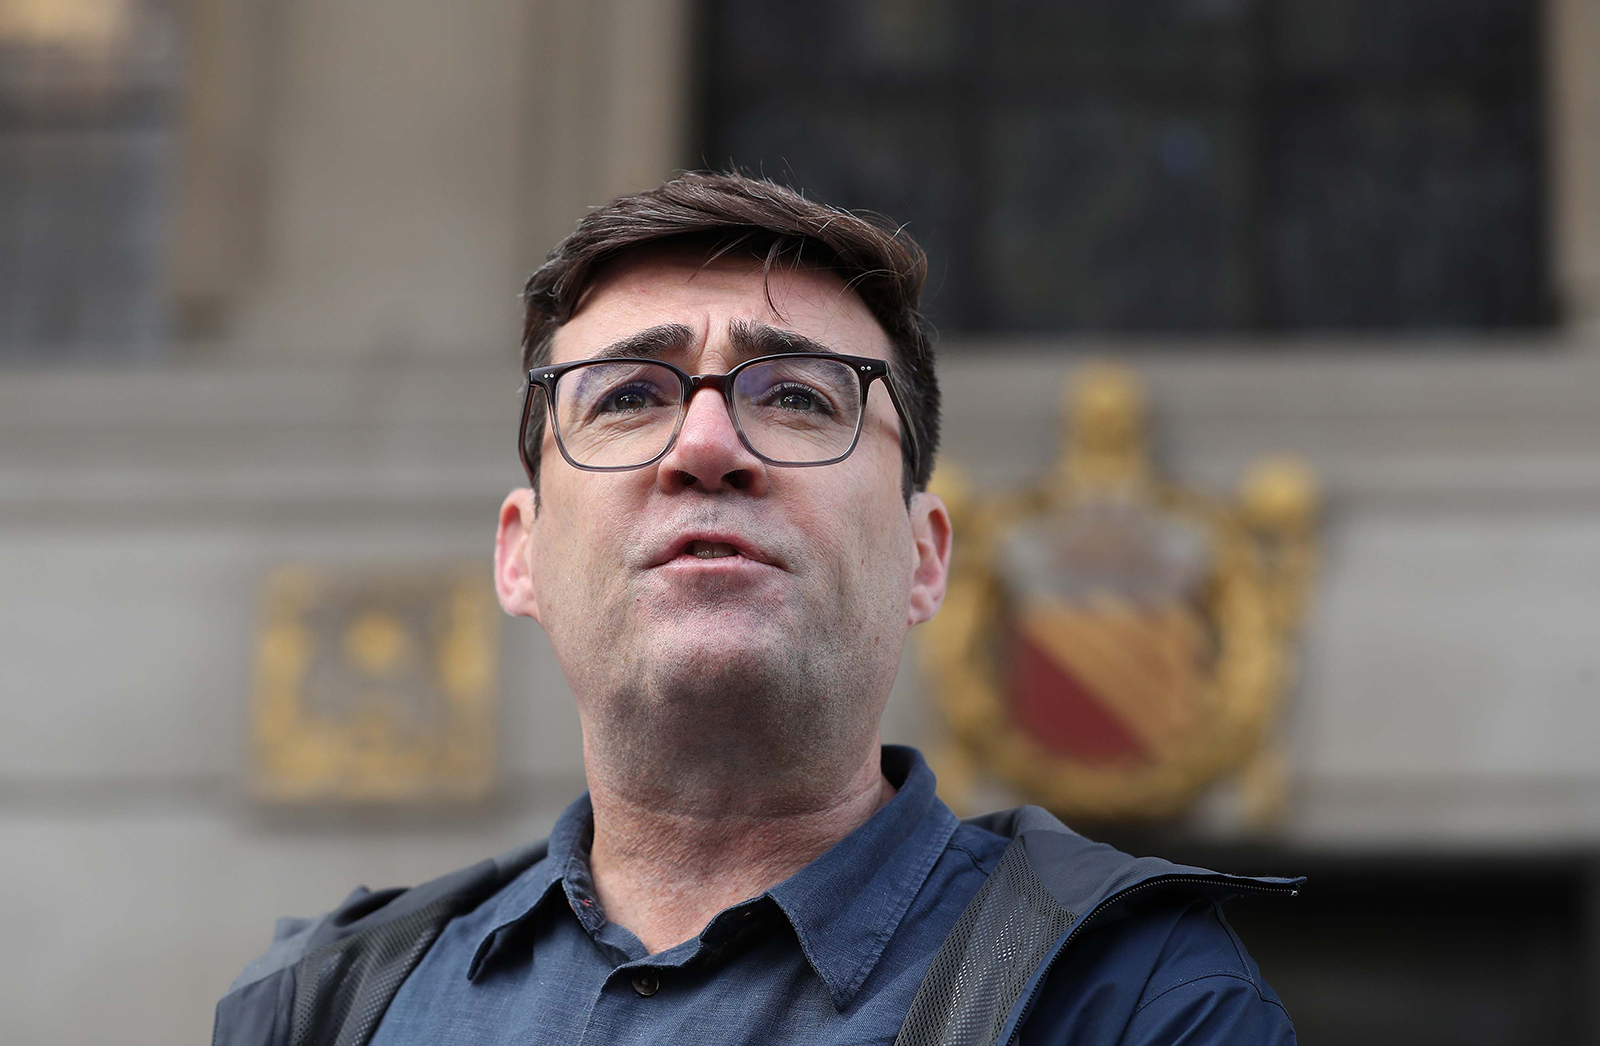 Greater Manchester mayor Andy Burnham speaks to the media outside the Central Library in Manchester, England, on October 15.